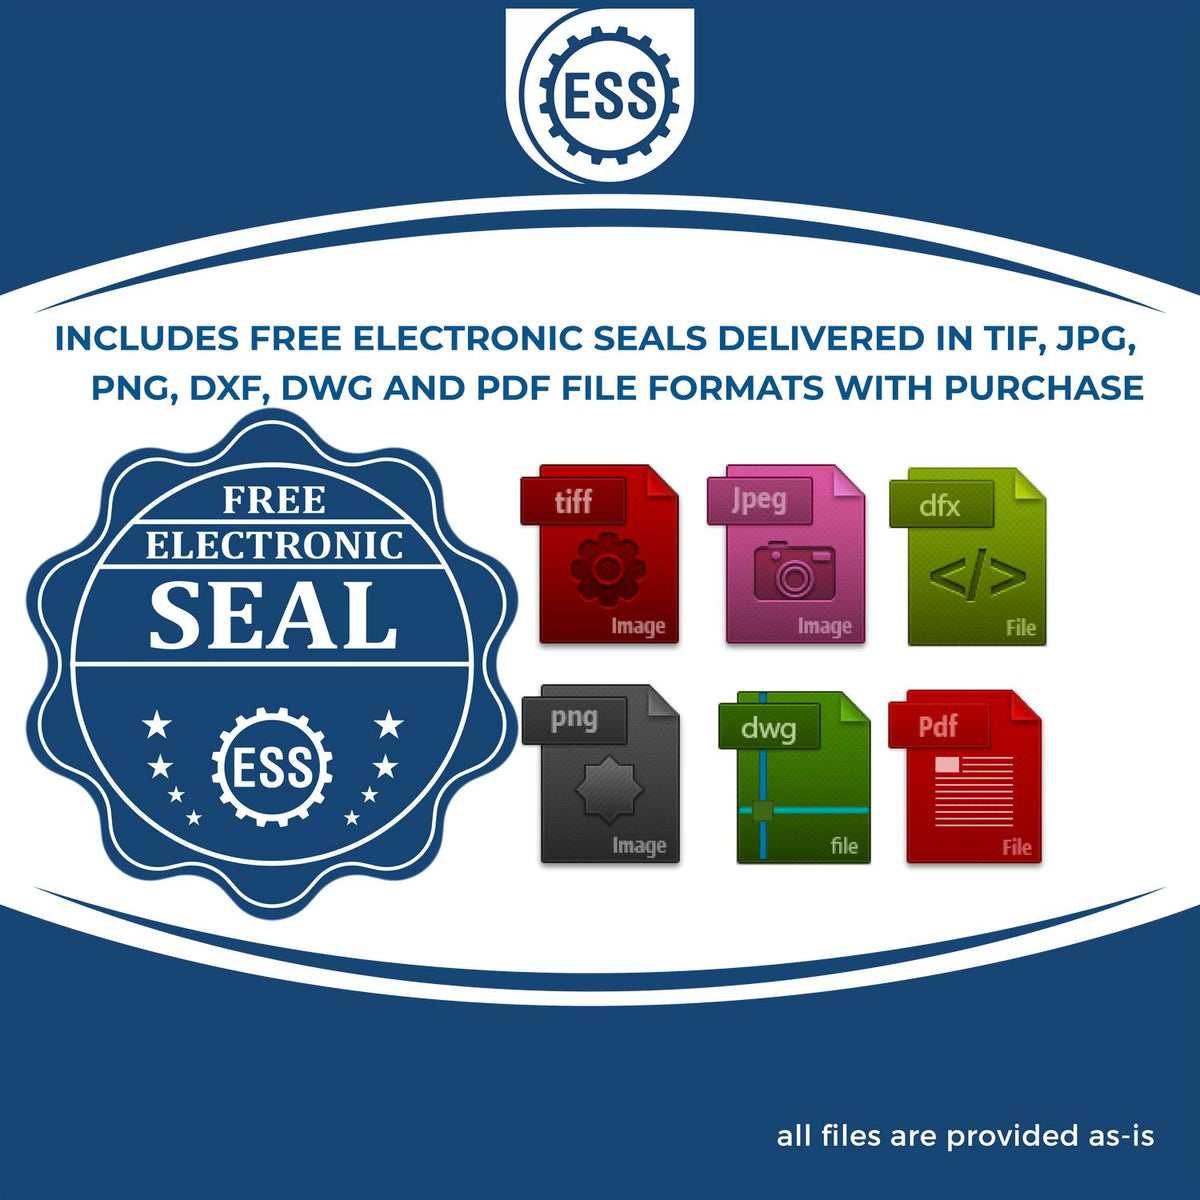 An infographic for the free electronic seal for the State of Ohio Extended Long Reach Geologist Seal illustrating the different file type icons such as DXF, DWG, TIF, JPG and PNG.